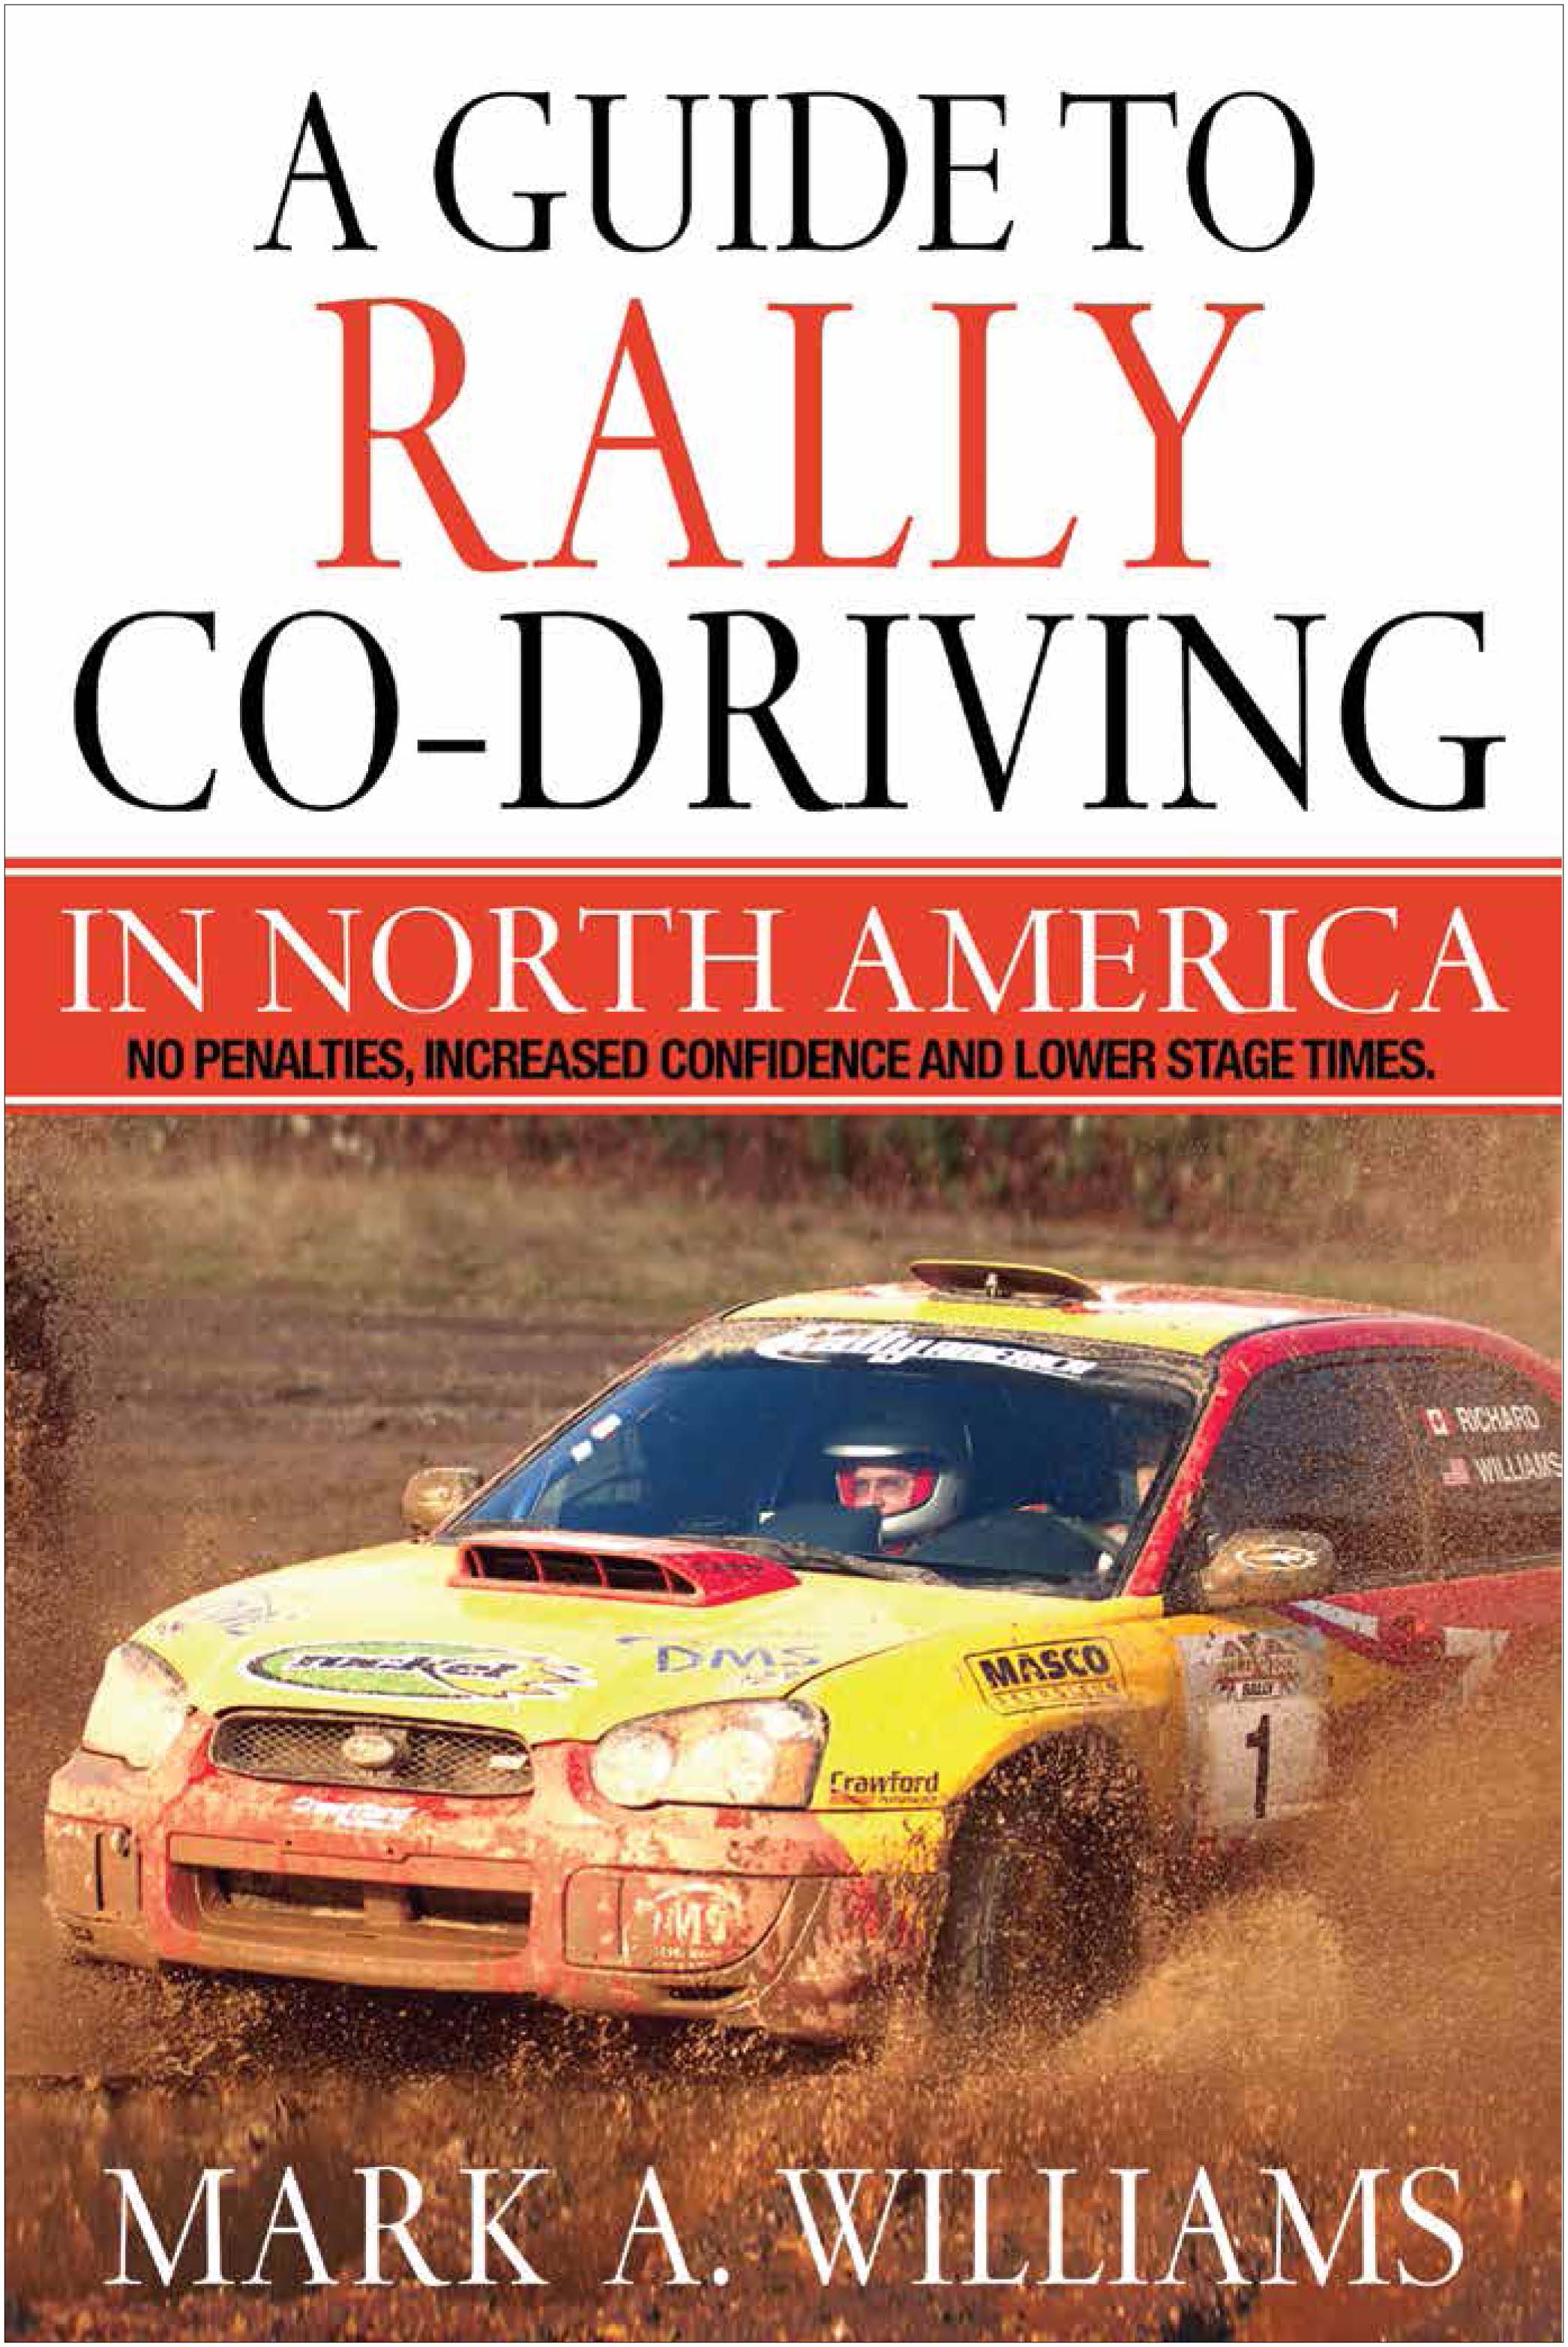 A Guide to Rally Co-driving in North America